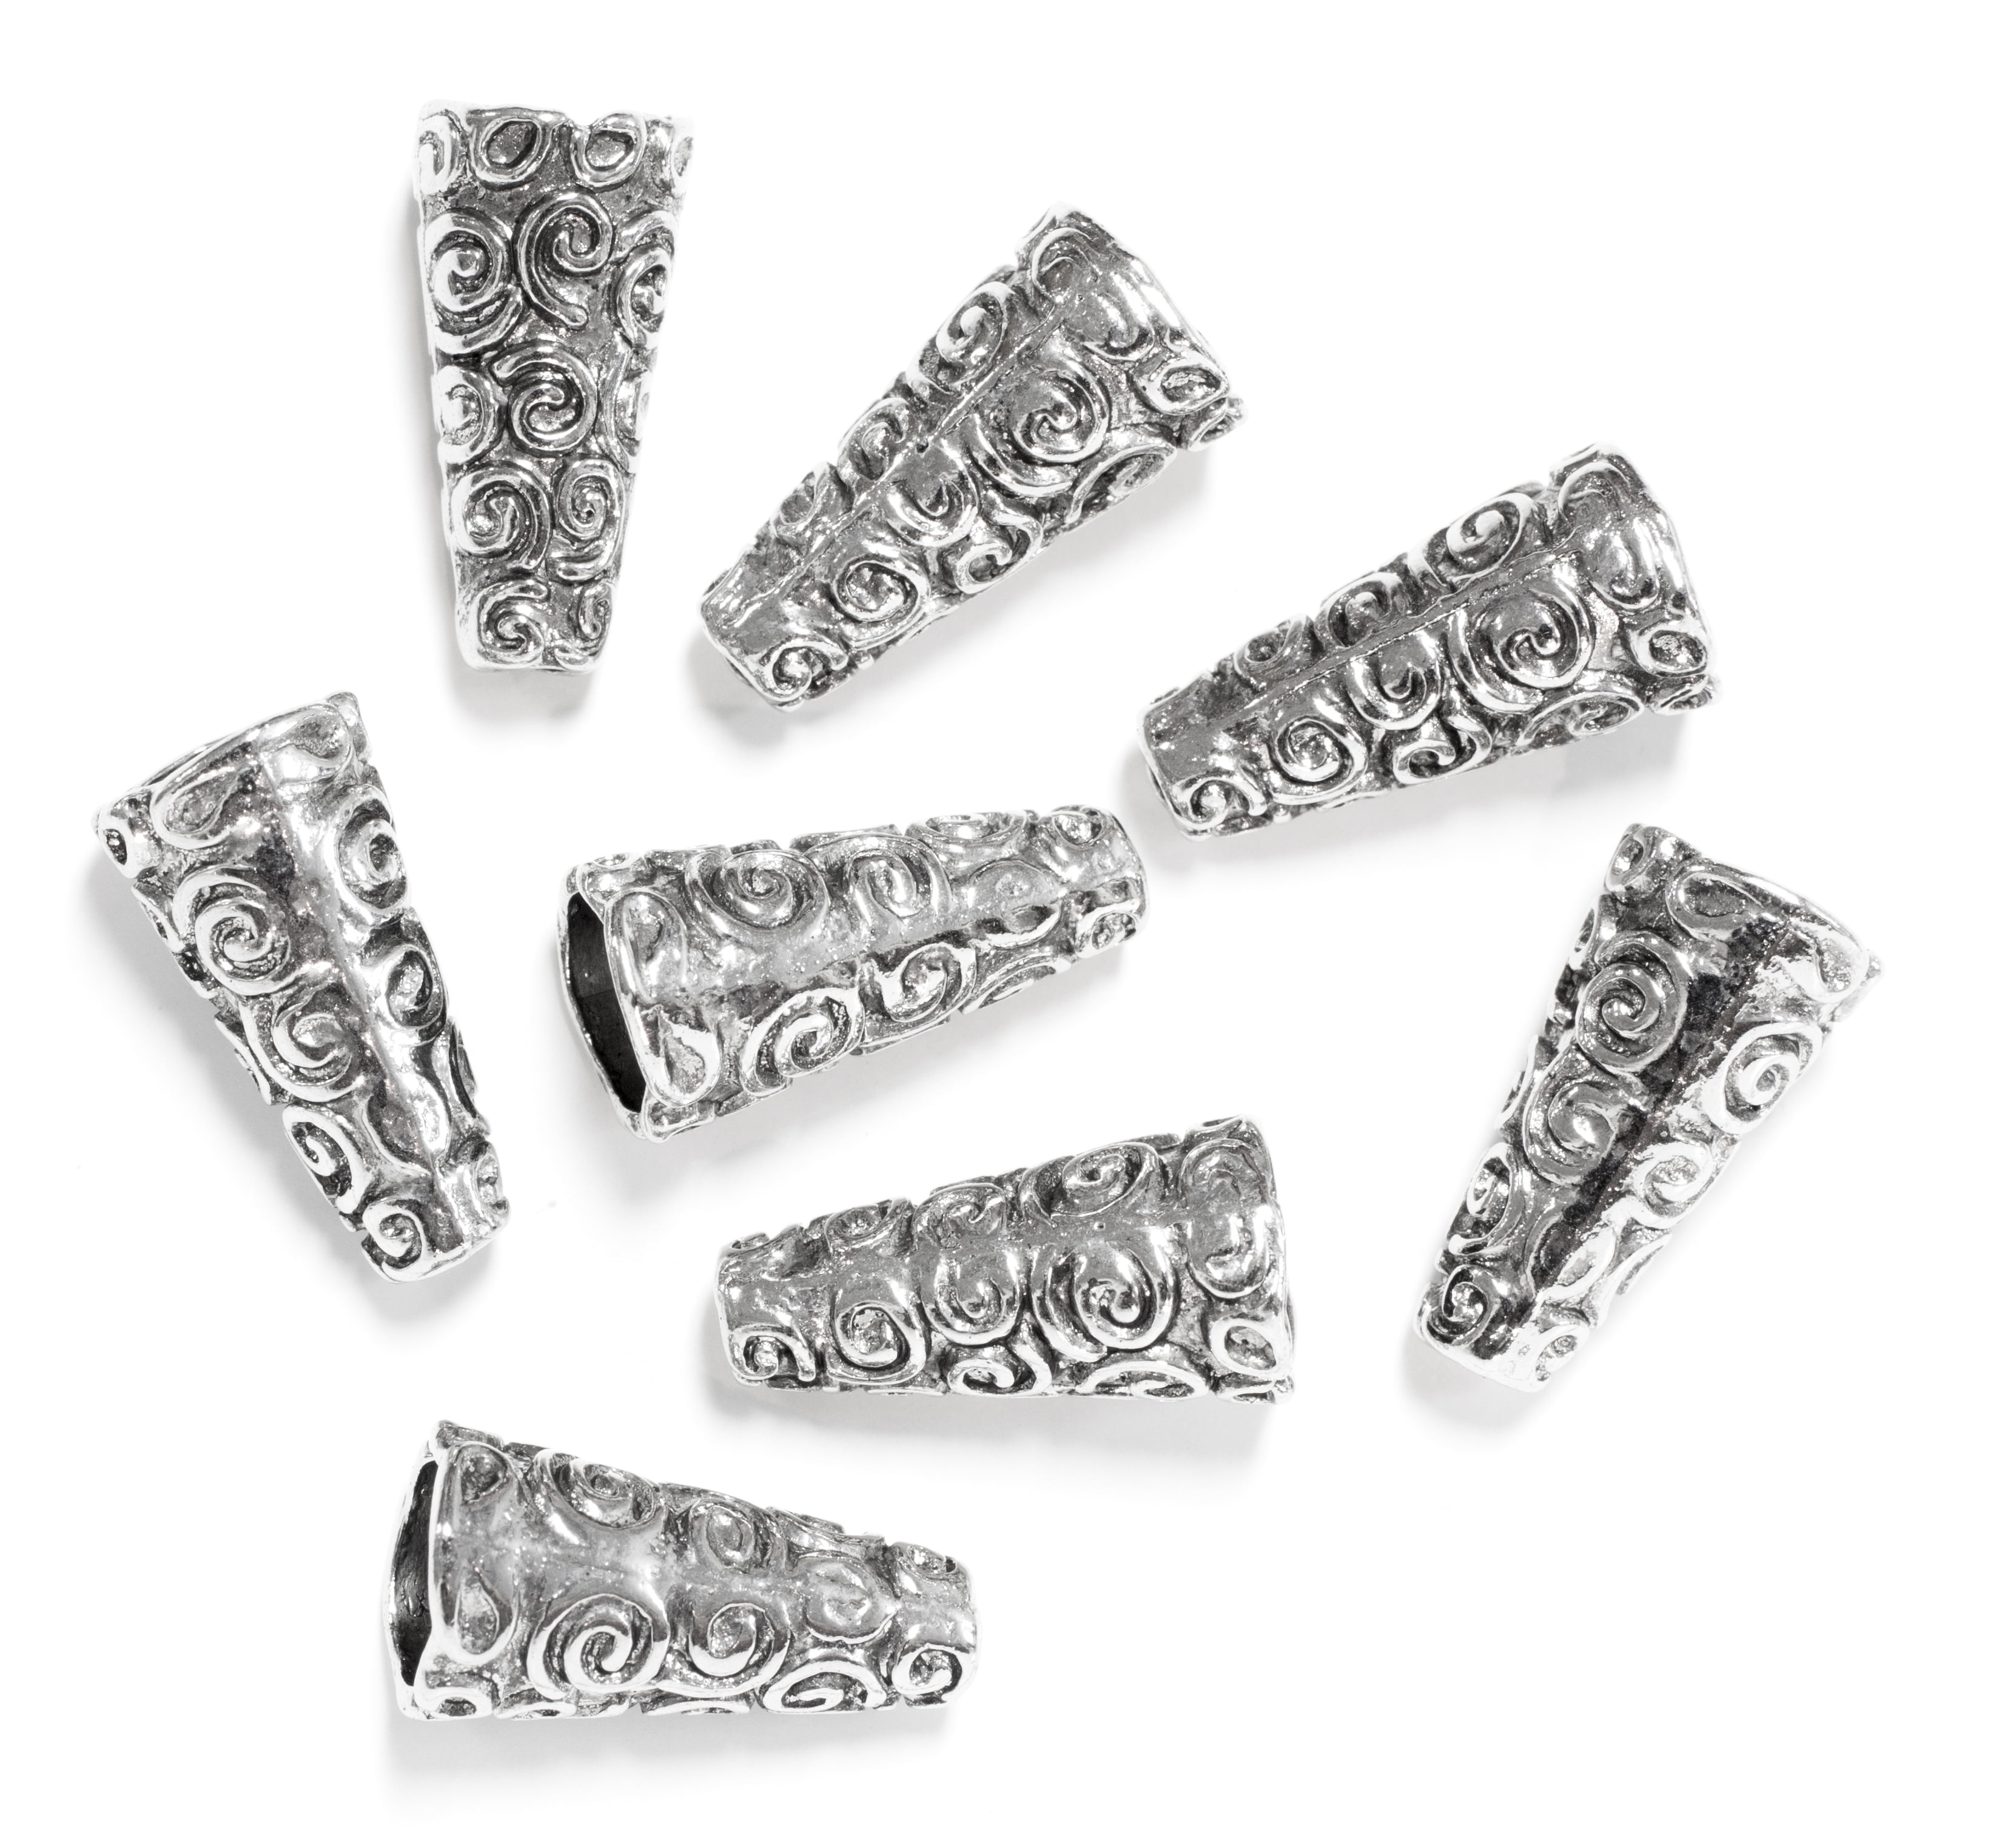 50 pcs Silver Plated 22*8mm Wholesale Bead Caps Jewelry Findings Crafts Making 